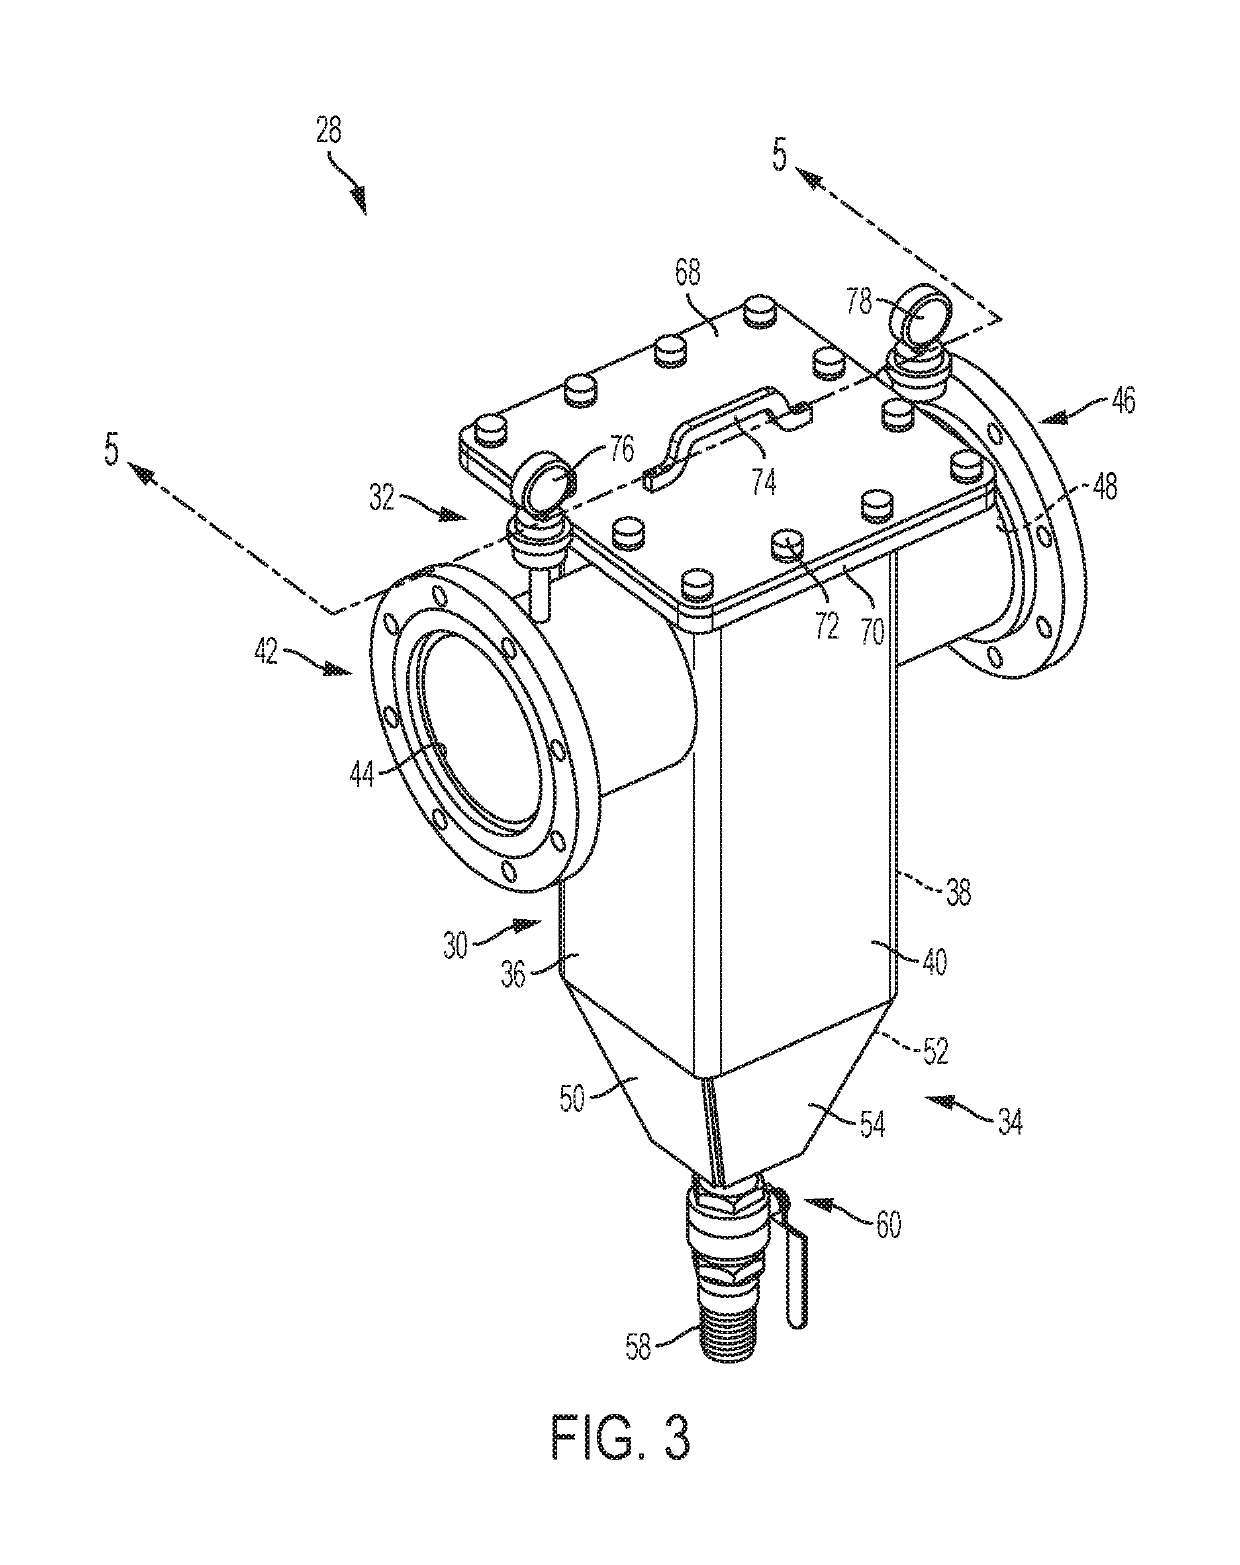 Strainer device for wash water used with equipment in the aggregate and mining industries